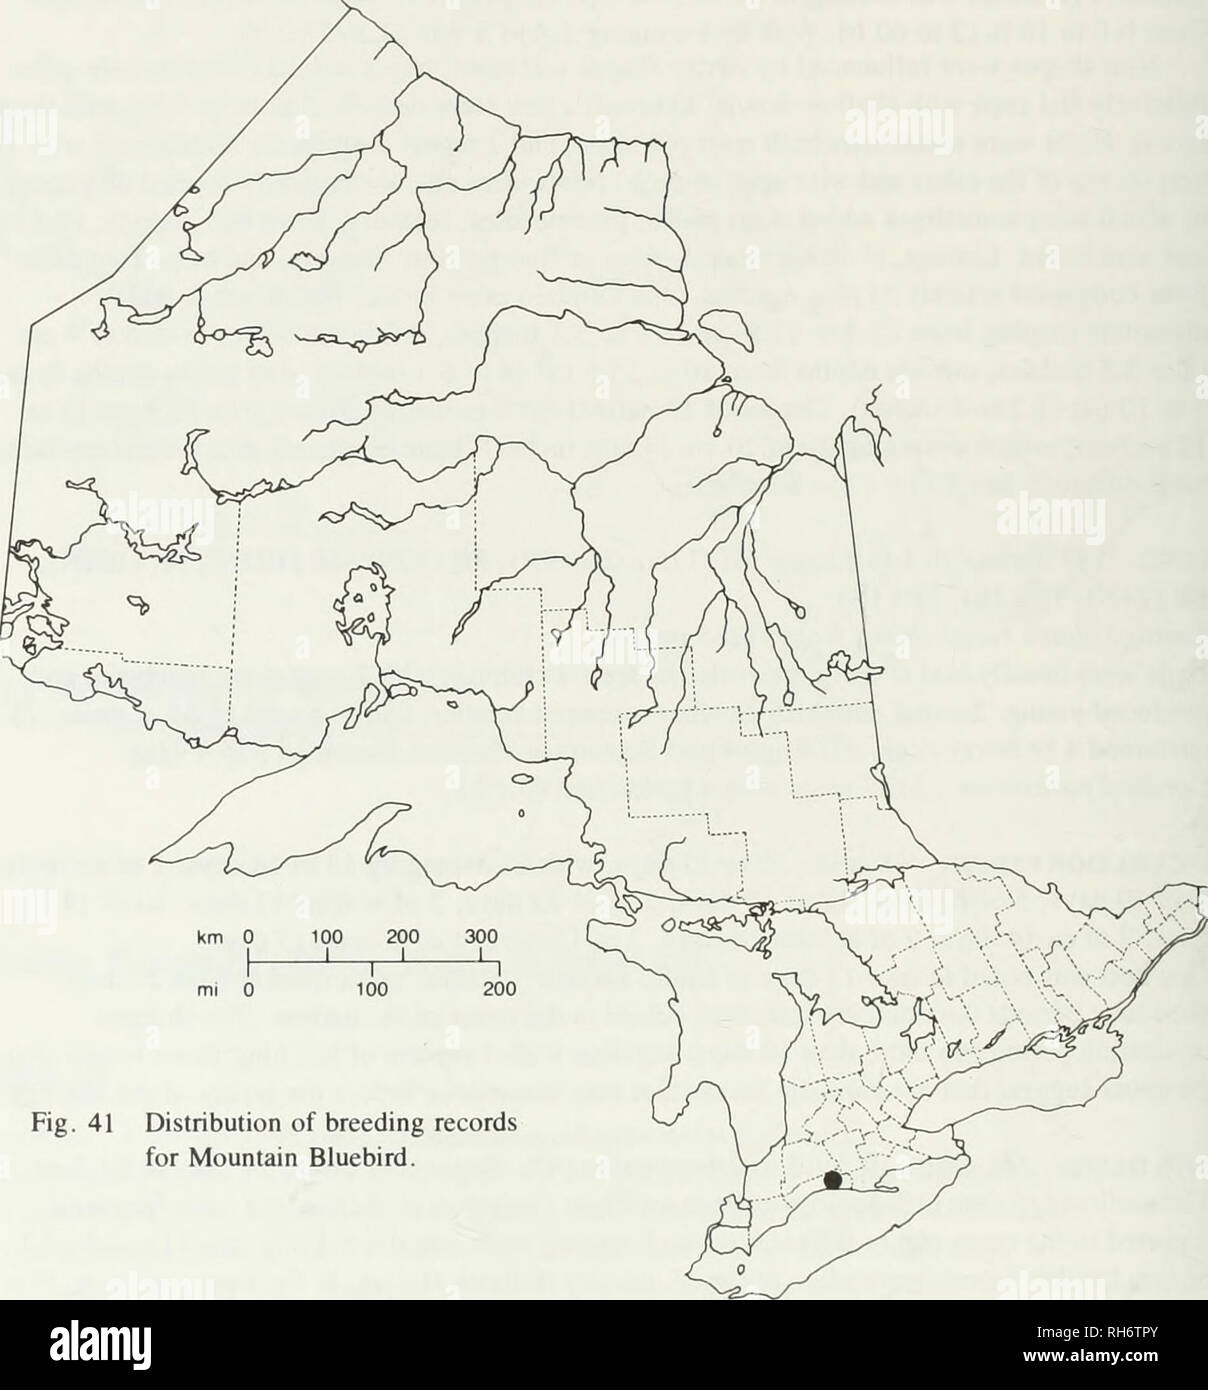 . Breeding birds of Ontario : nidiology and distribution. Birds; Birds; Birds. Breeding Distribution Although much more numerous earlier in this century, the Eastern Bluebird (Fig. 175) can still be found throughout most of its former range in the agricultural and forest-cleared areas in the southern half of the province. Summer records occur as far north as Favourable Lake and Moosonee, but bluebirds are unlikely to be seen north of Lac Seul or Kapuskasing and are now rather locally distributed. Some extensive nest-box projects in southern Ontario have resulted in local increases in populatio Stock Photo